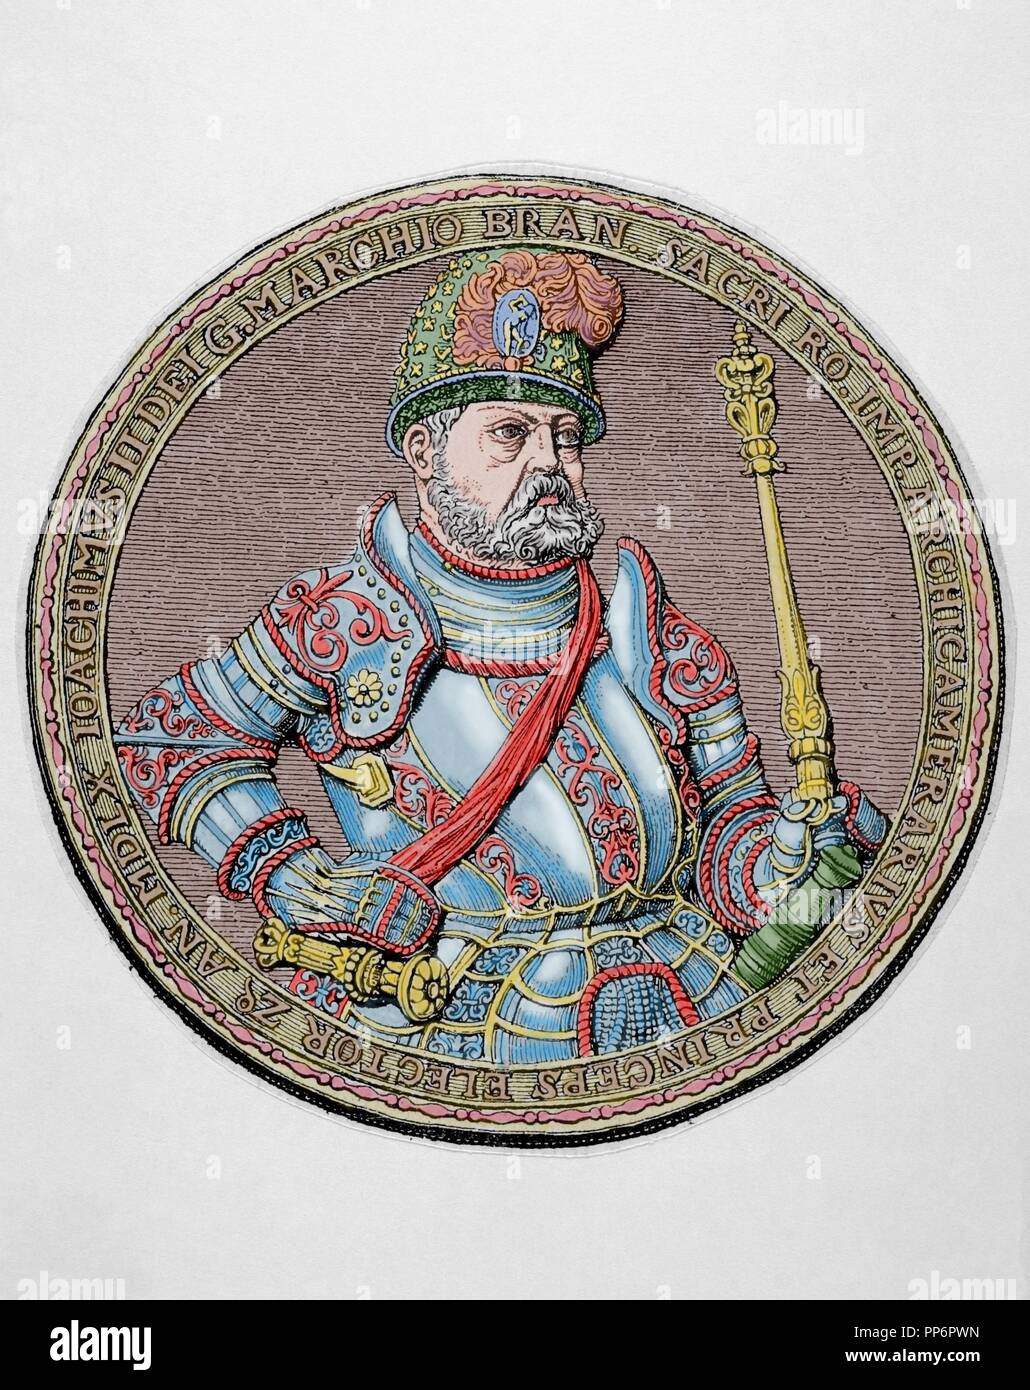 Joachim II Hector (1505-1571). Elector of Brandenburg. Member of the House of Hohenzollern. Colored engraving. 'Historia Universal', 1882. Stock Photo